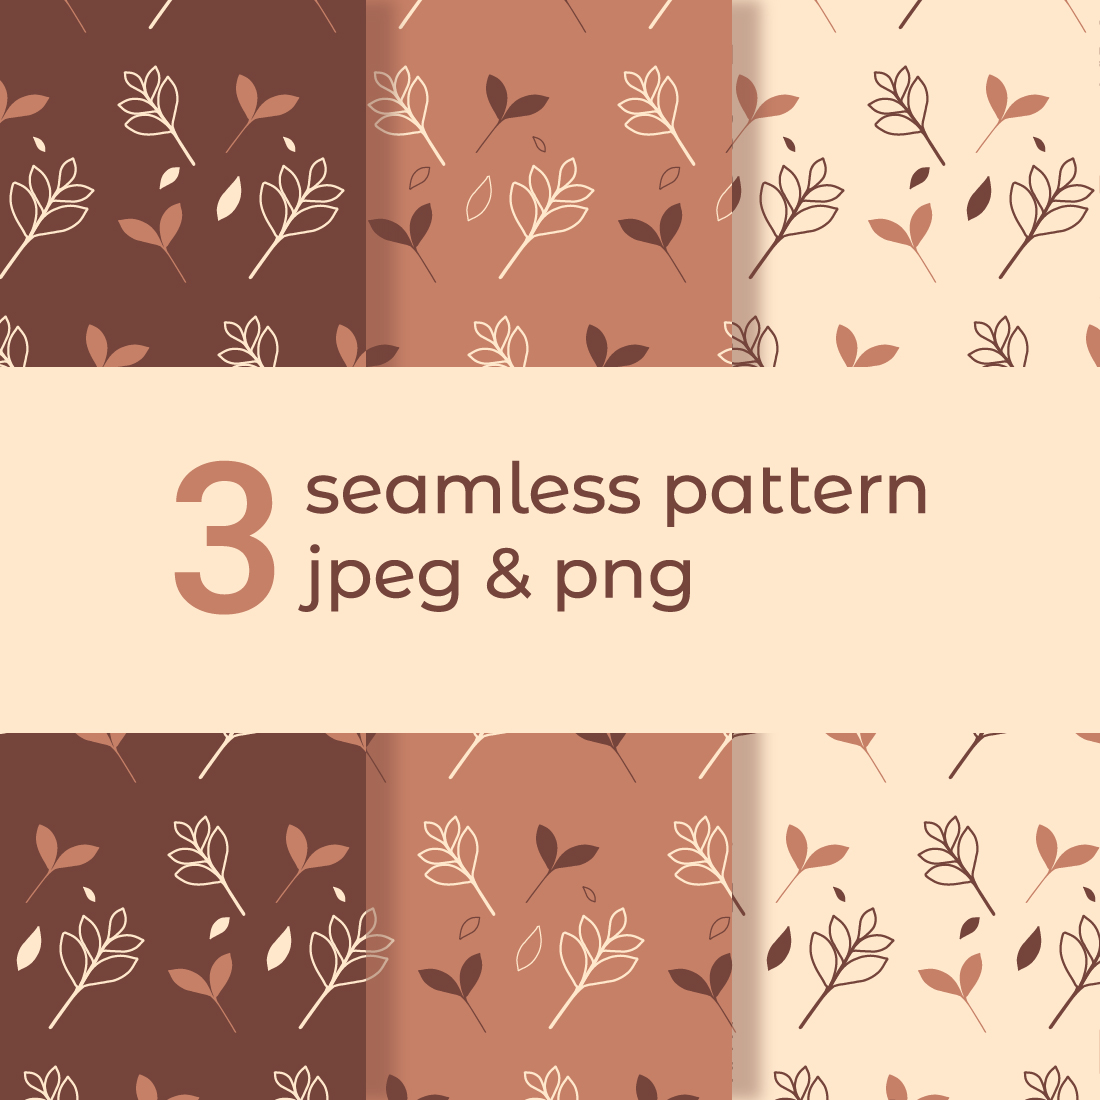 Warm and cozy, floral seamless pattern Made in 3 color options cover image.